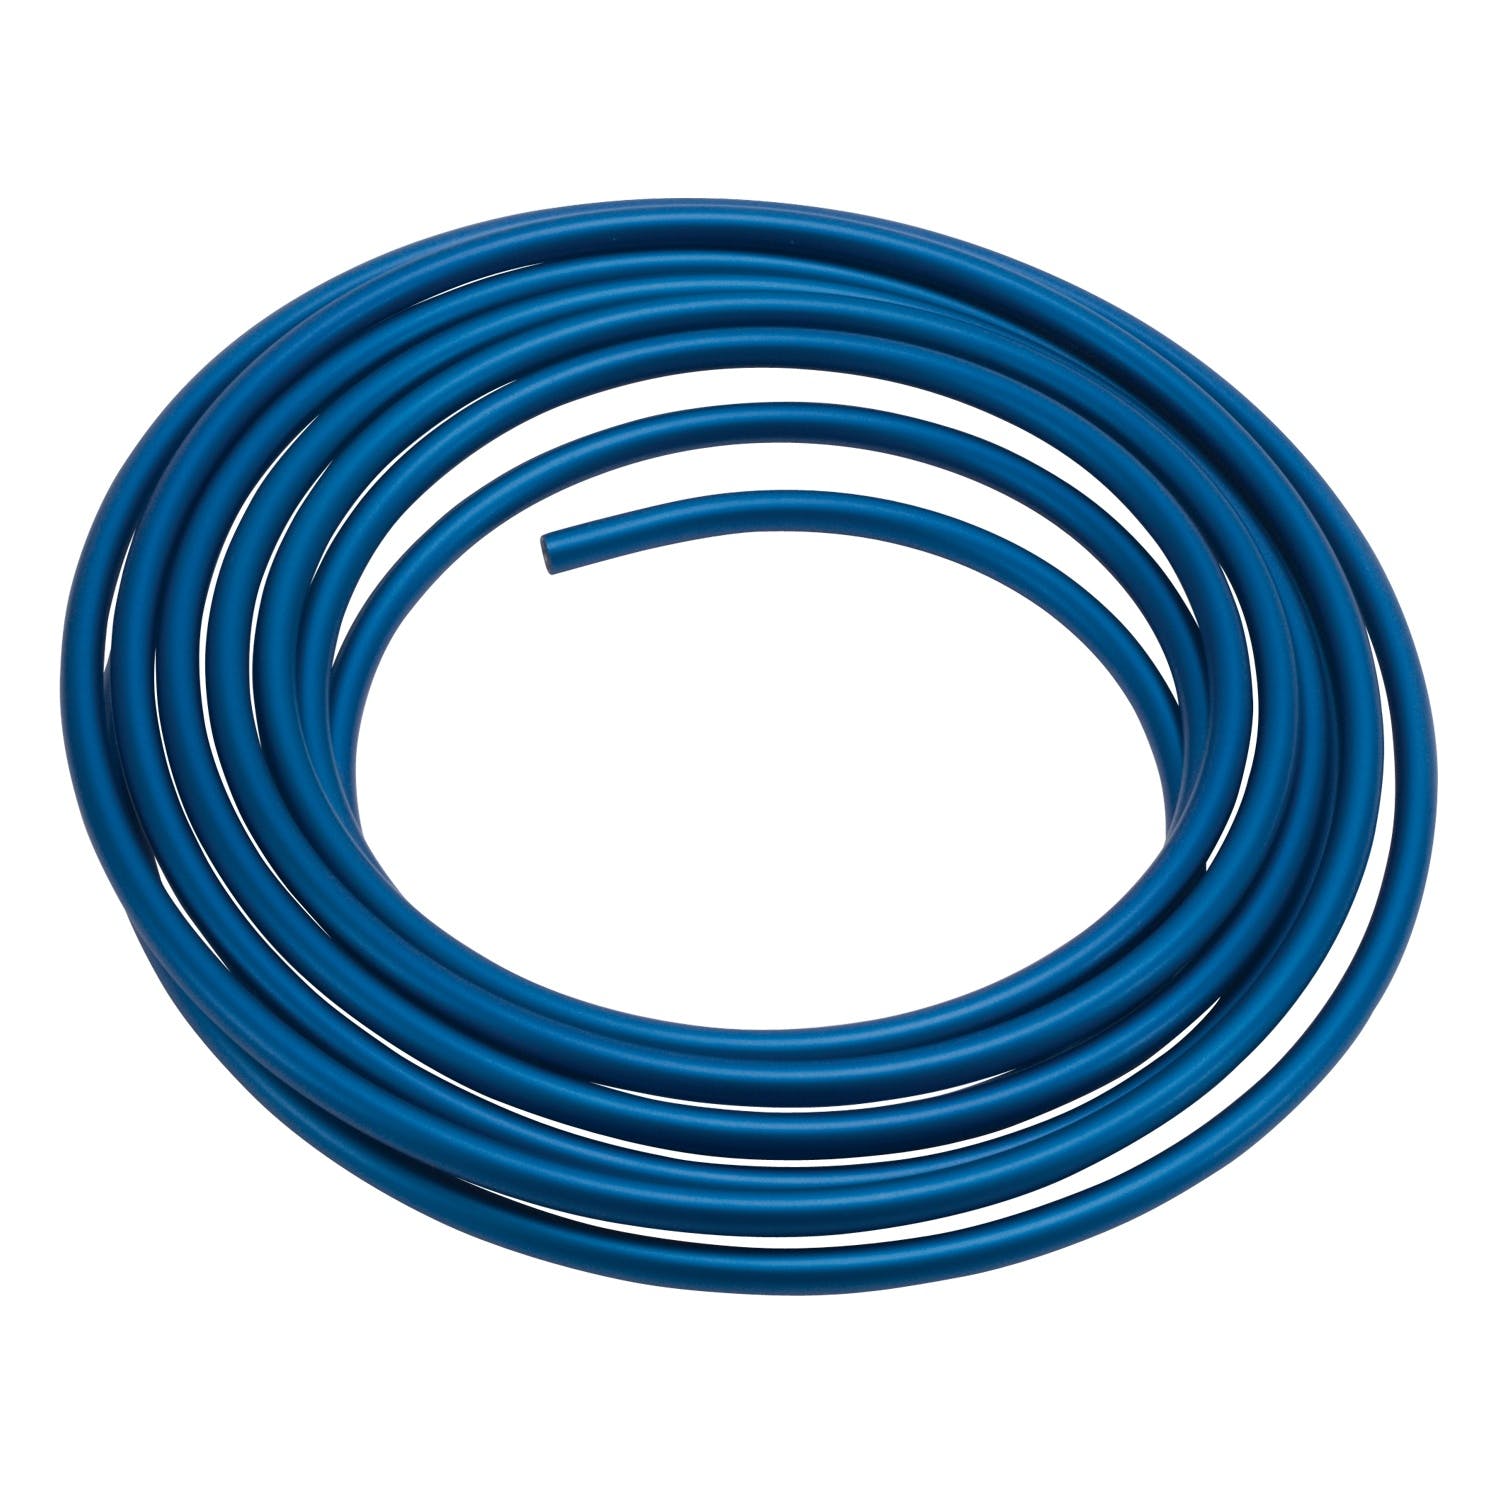 Russell 639270 Aluminum Fuel Line 1/2in Od Blue